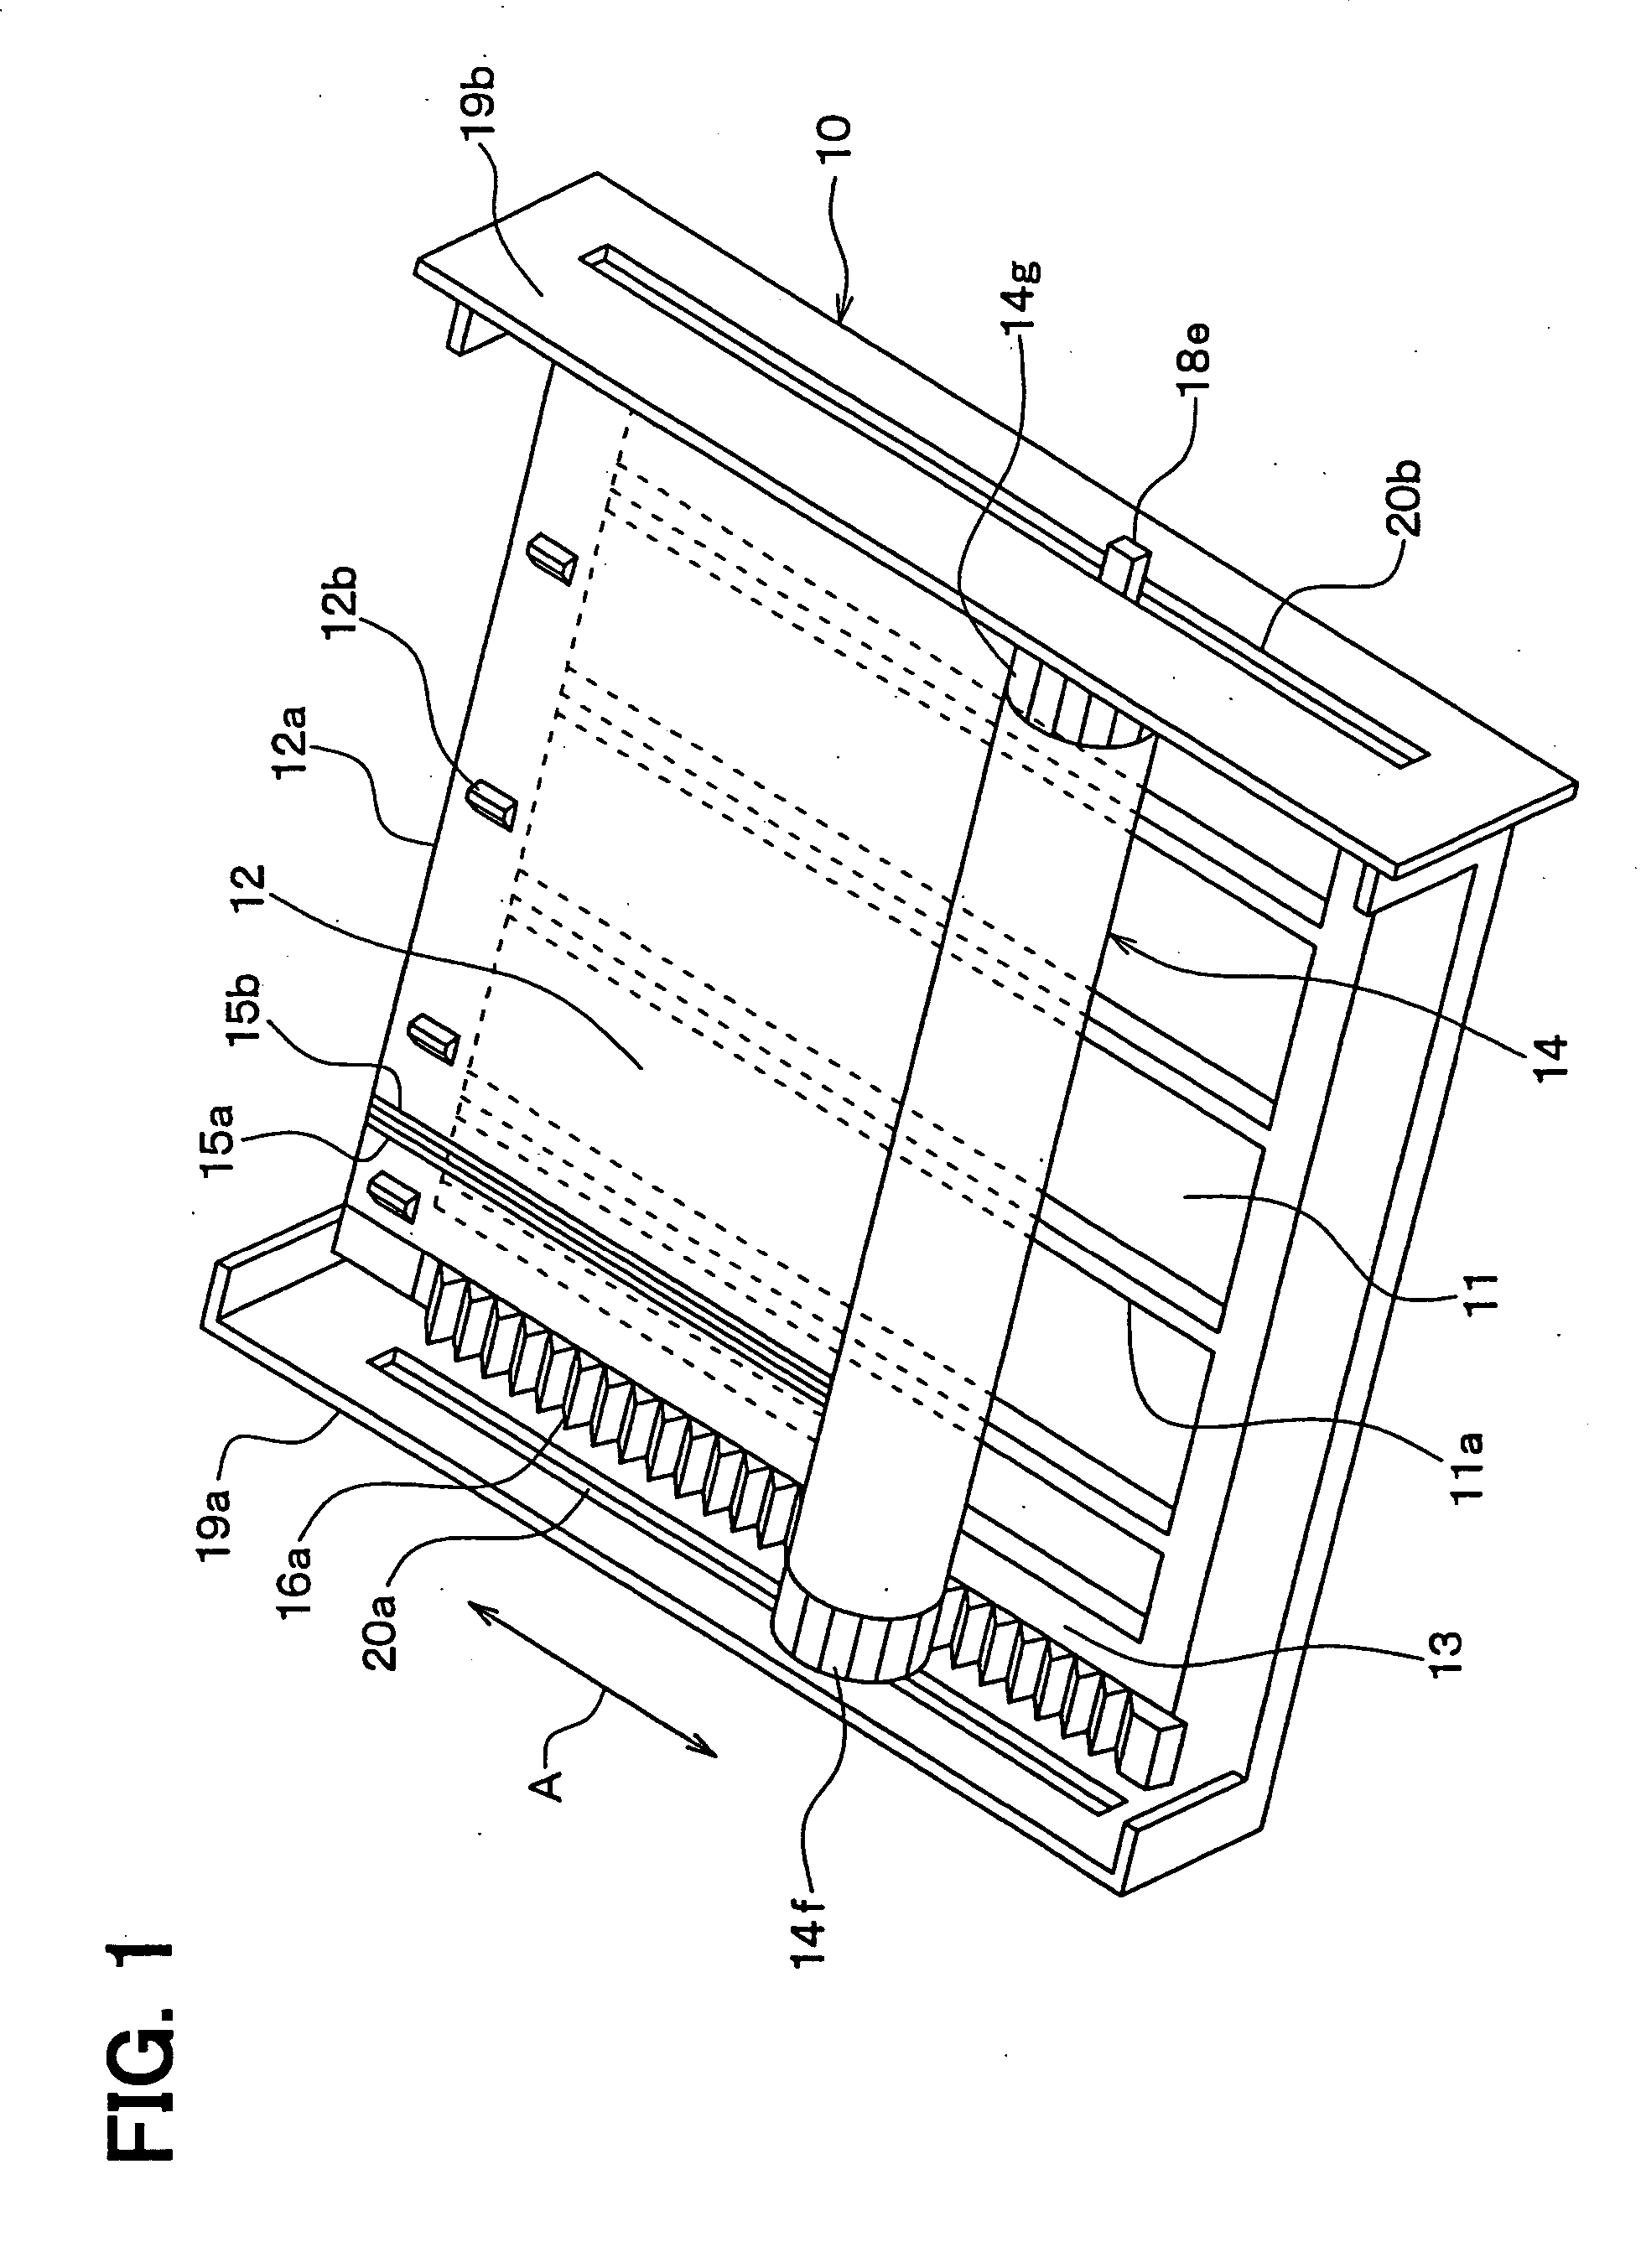 Air passage switching device